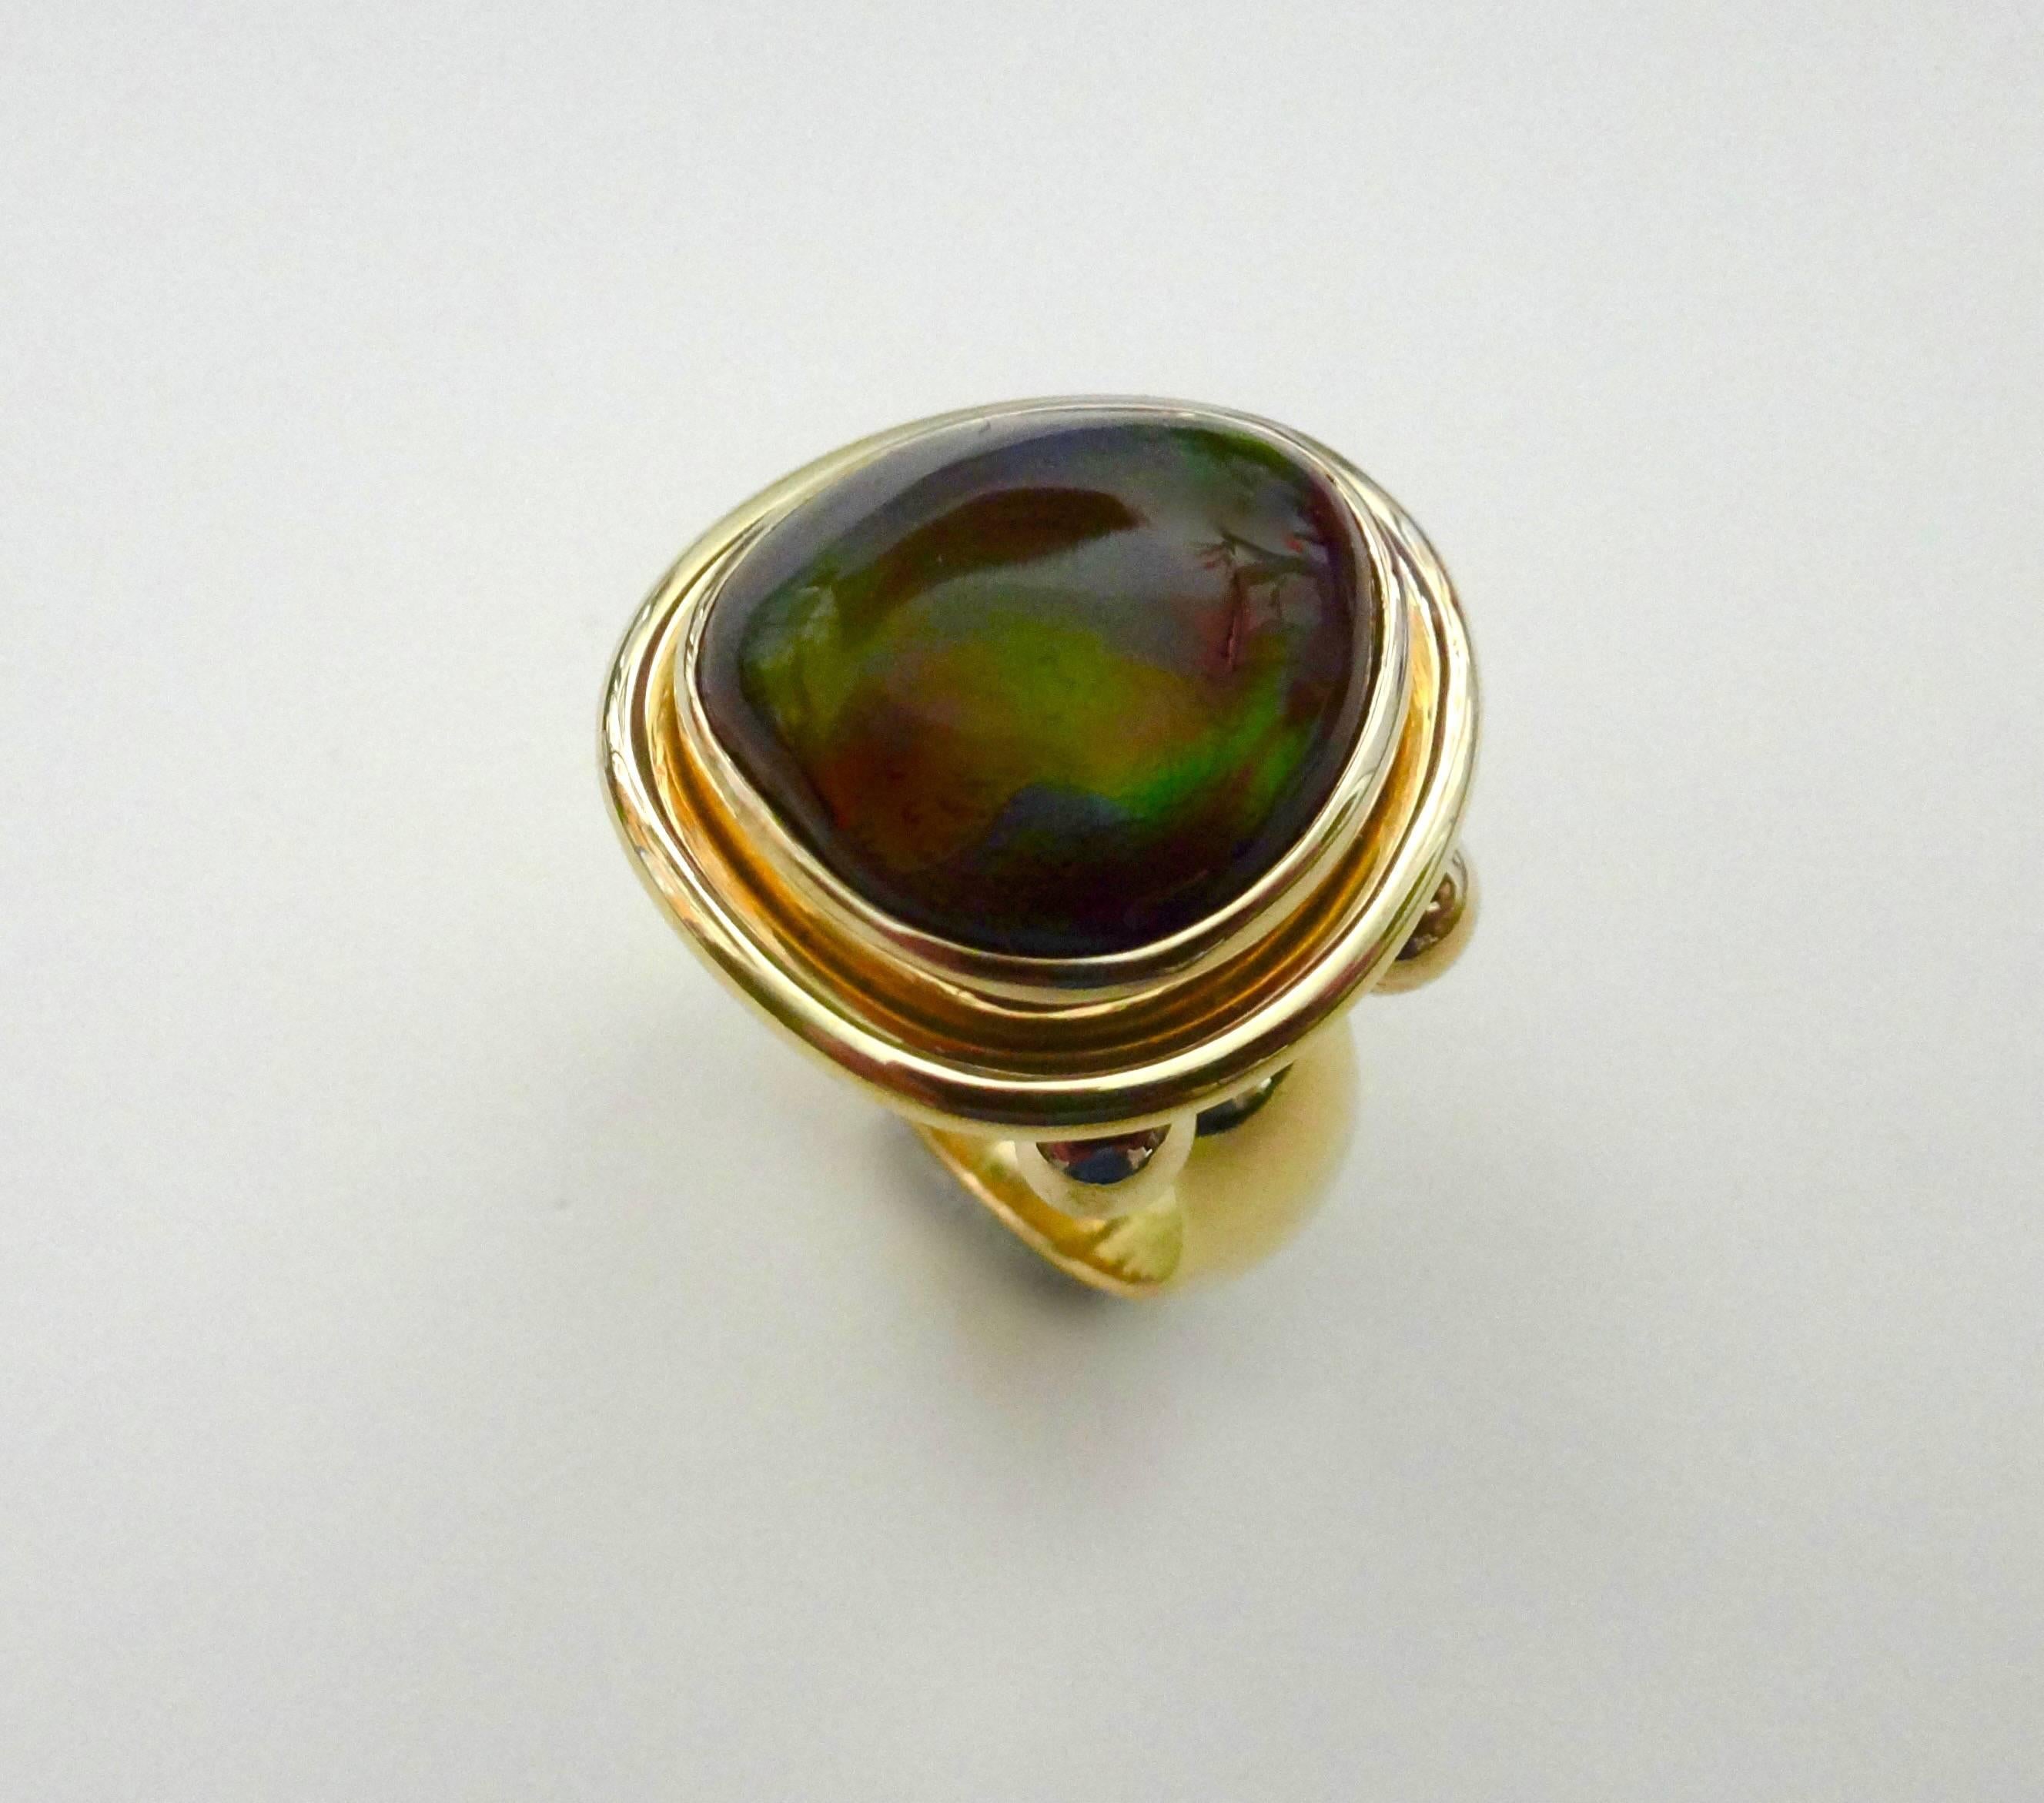 A superb example of Mexican Fire Agate is set in a handmade 18k yellow gold ring.  The gem has a remarkable range of colors including orange, green, gold, blue and even a hint of purple, the rarest color in this type of agate, all in a brown body. 